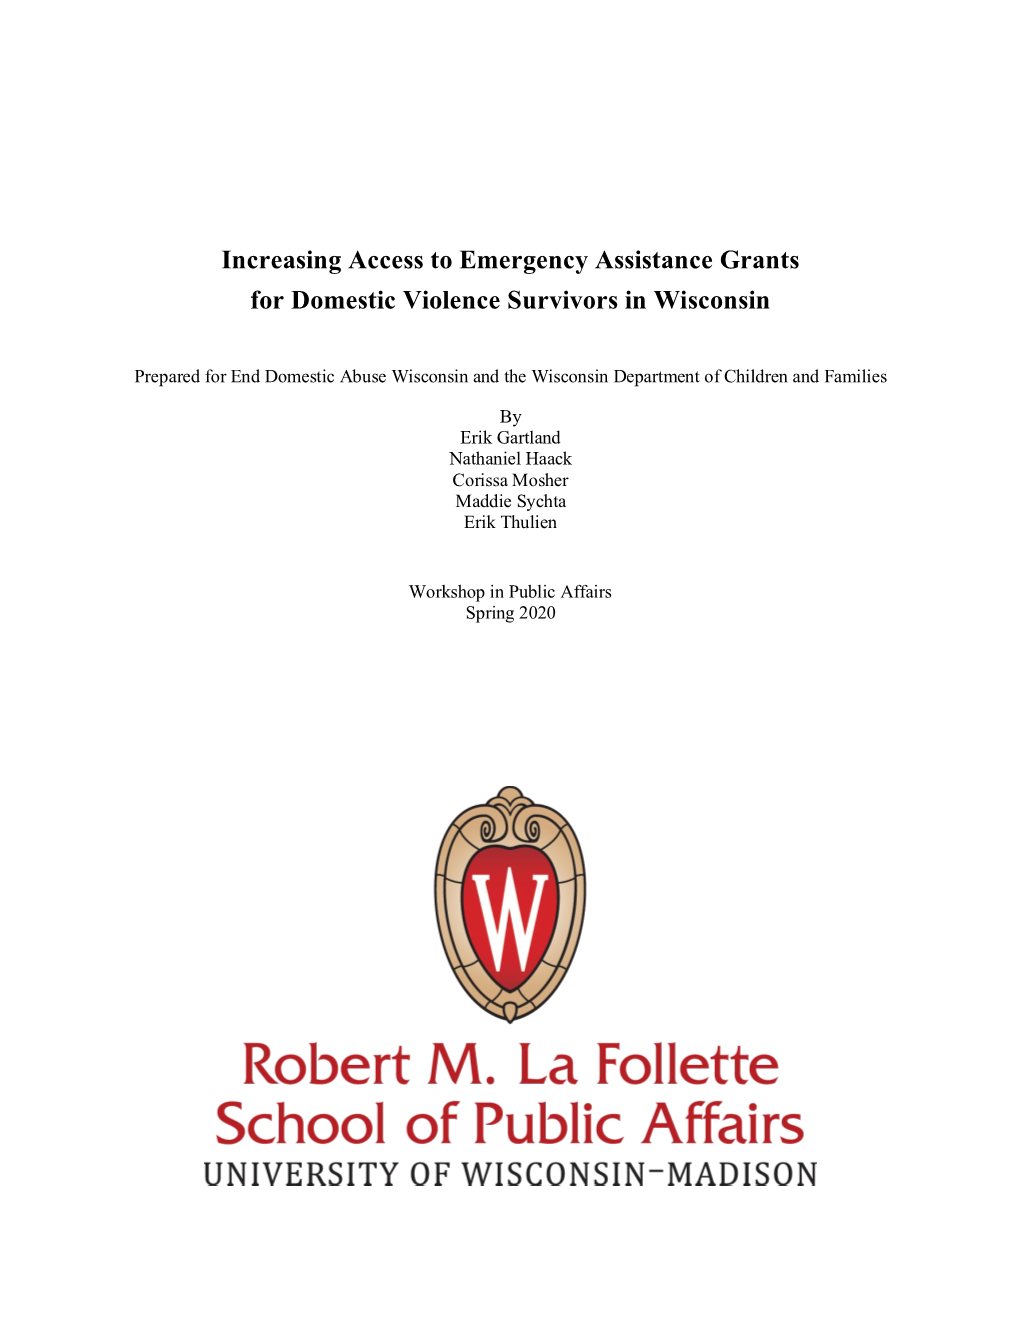 Increasing Access to Emergency Assistance Grants for Domestic Violence Survivors in Wisconsin